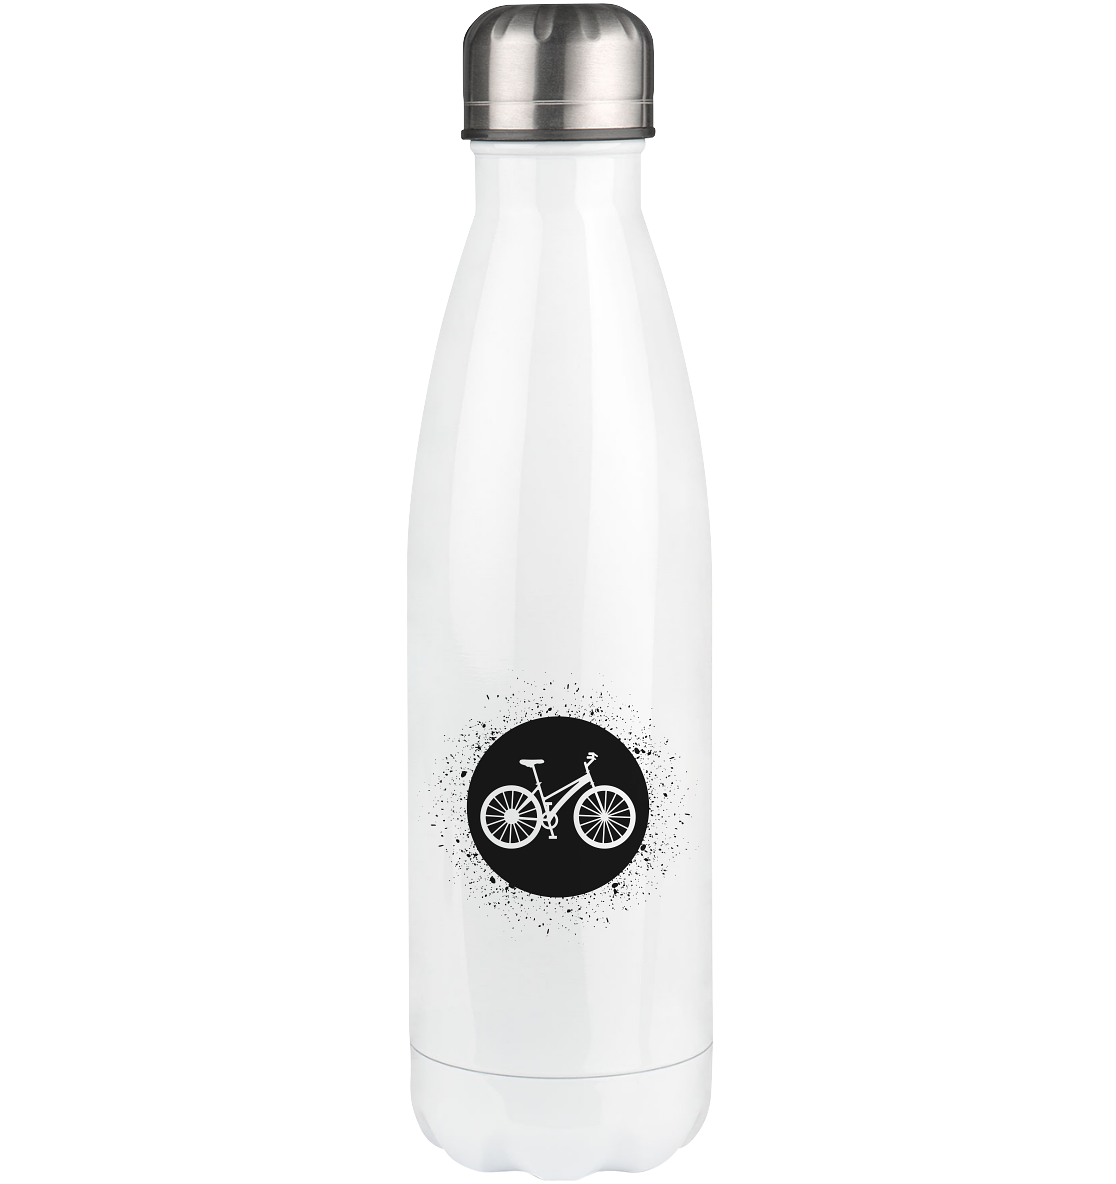 Circle with Splash and Bicycle - Edelstahl Thermosflasche fahrrad 500ml